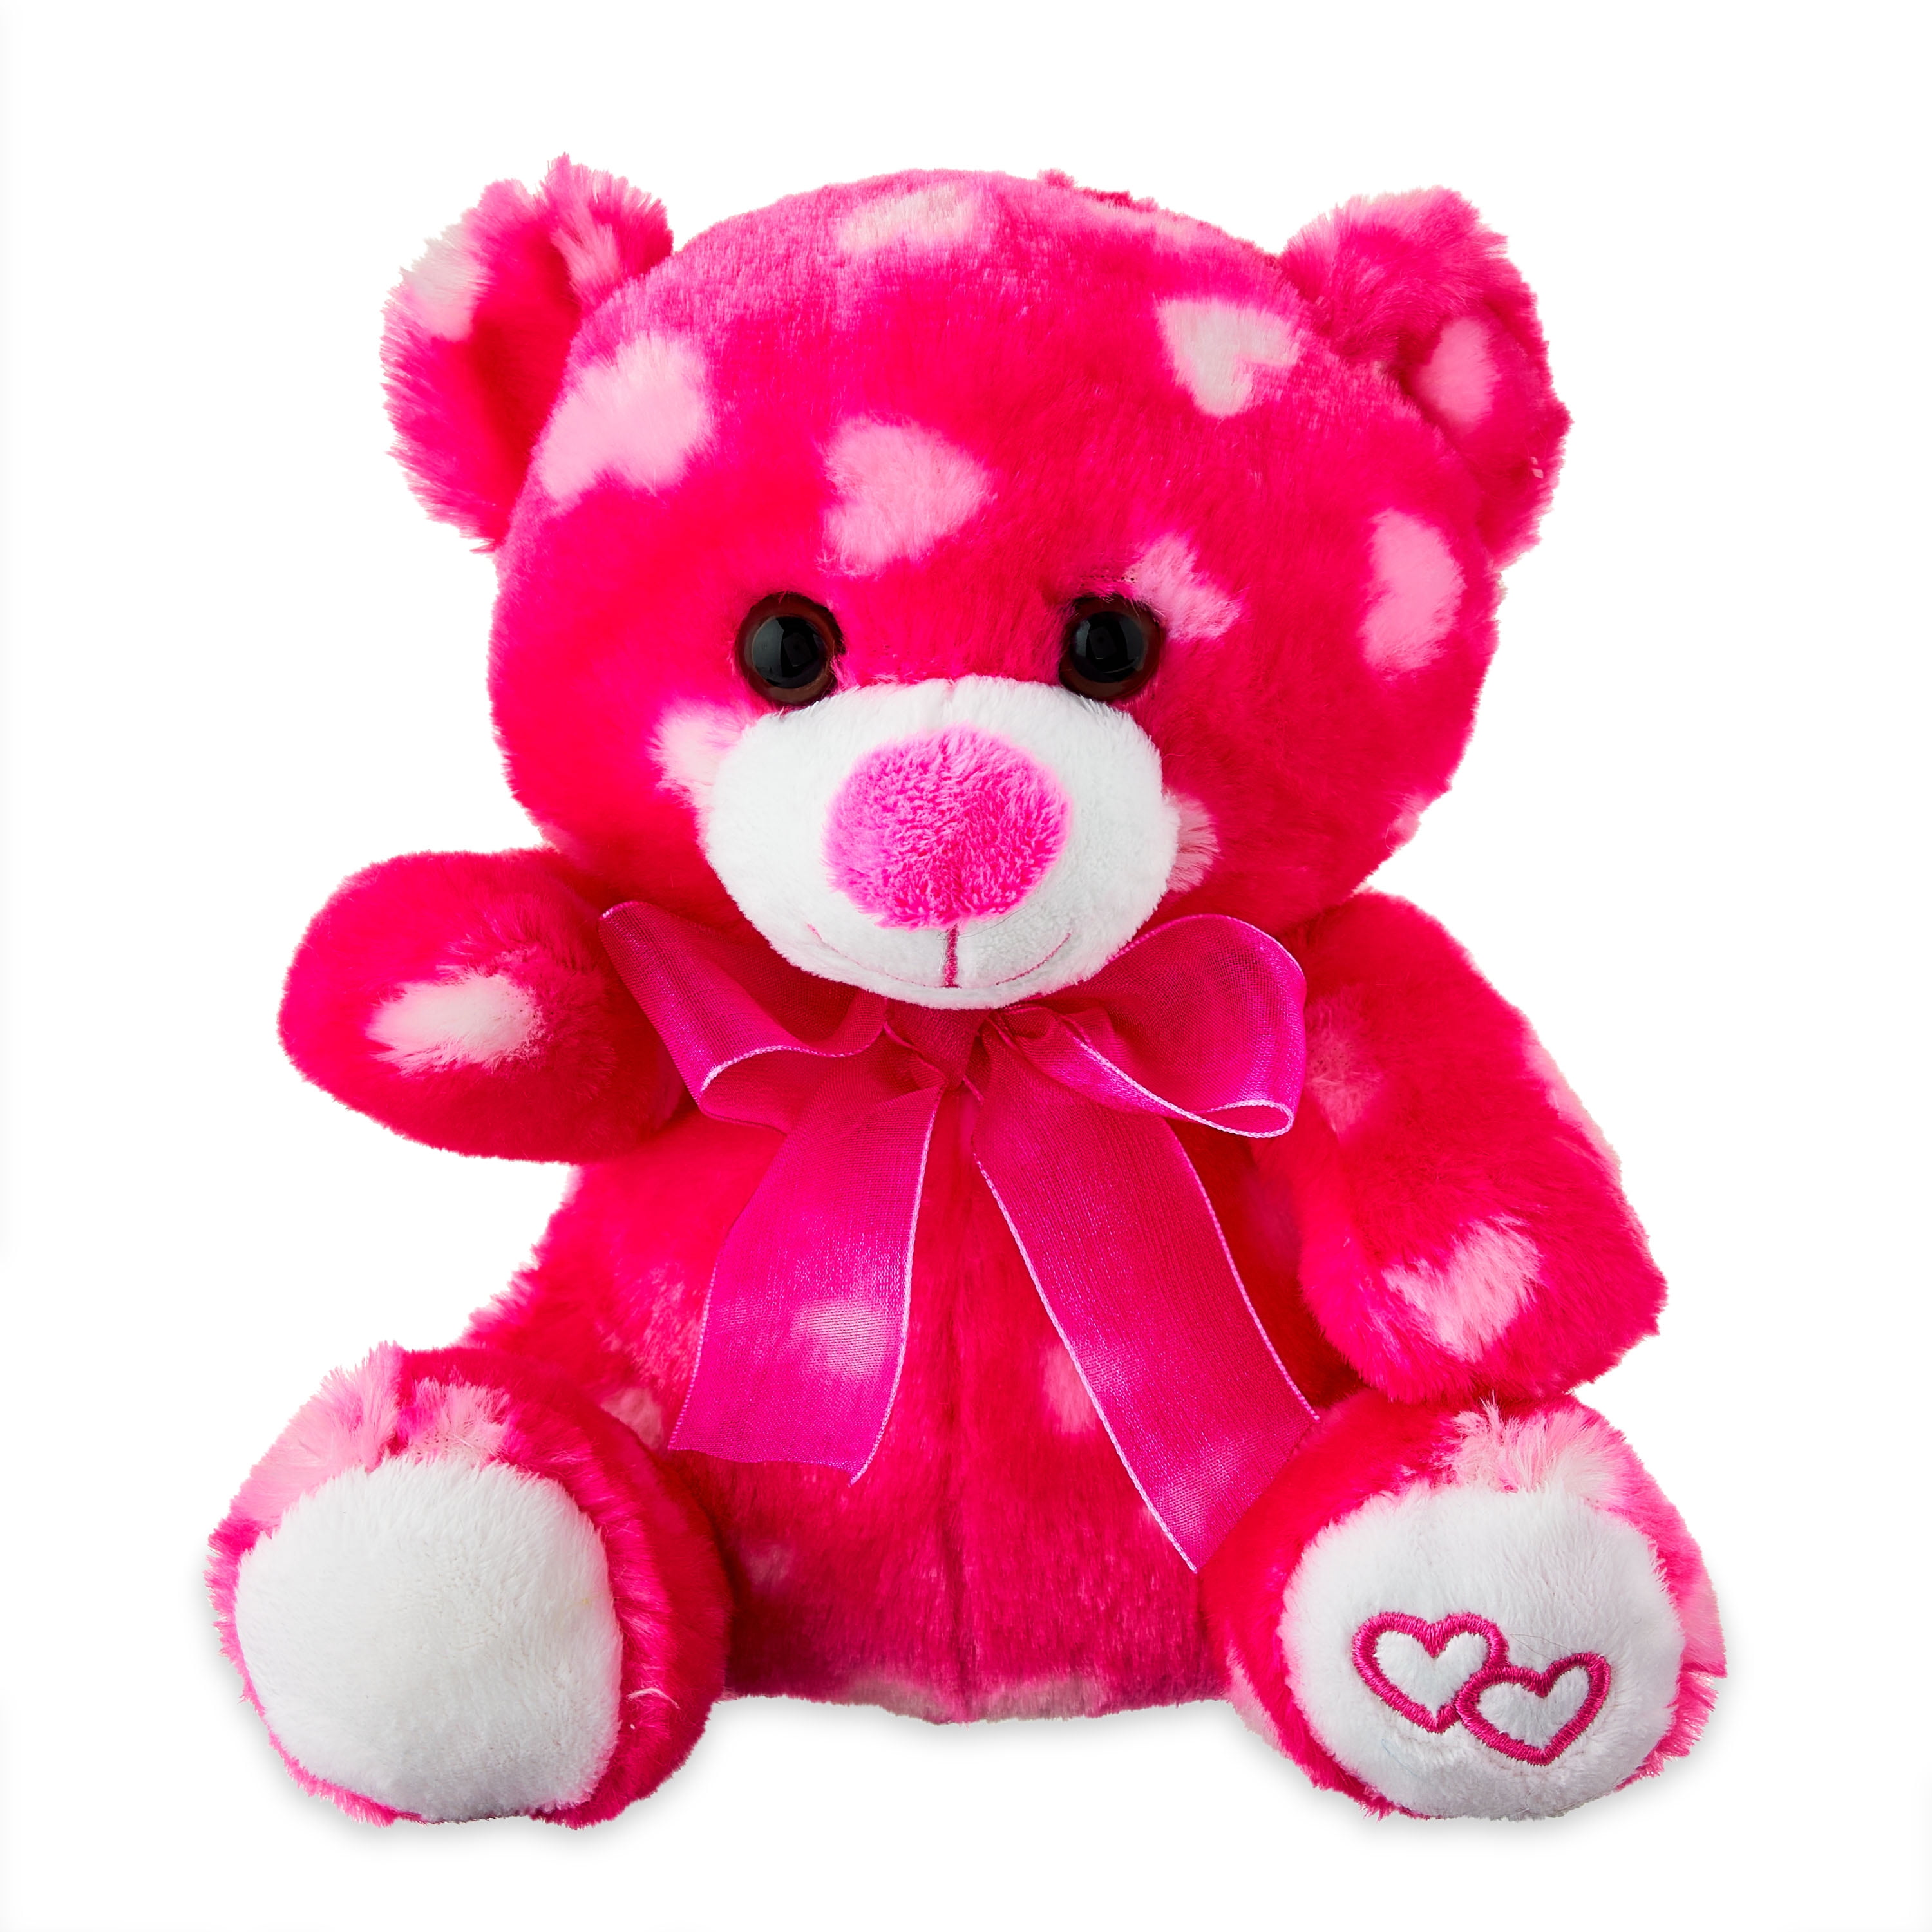 Way to Celebrate! Valentine’s Day 8in Soft Expression Plush Teddy Bear, Hot Pink with Hearts